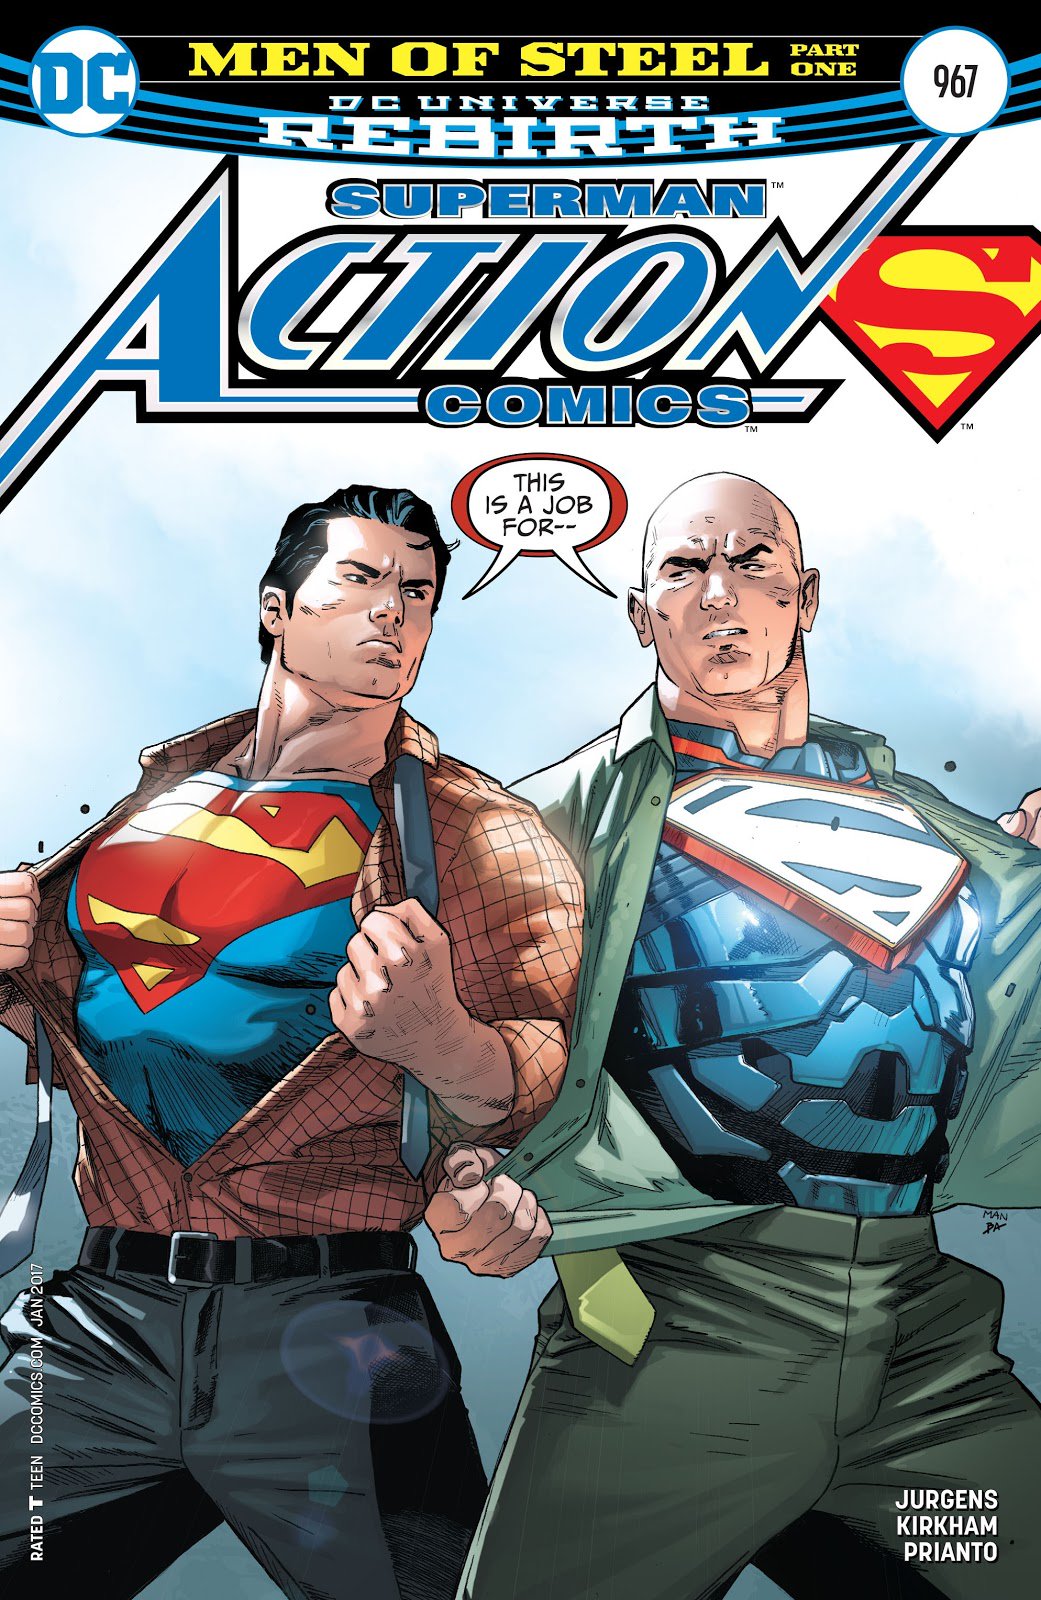 Read Comic Online on X: Action Comics (2016) Issue #967  t.coHVYE8ImlW5 t.coqwBNgnA2kH  X